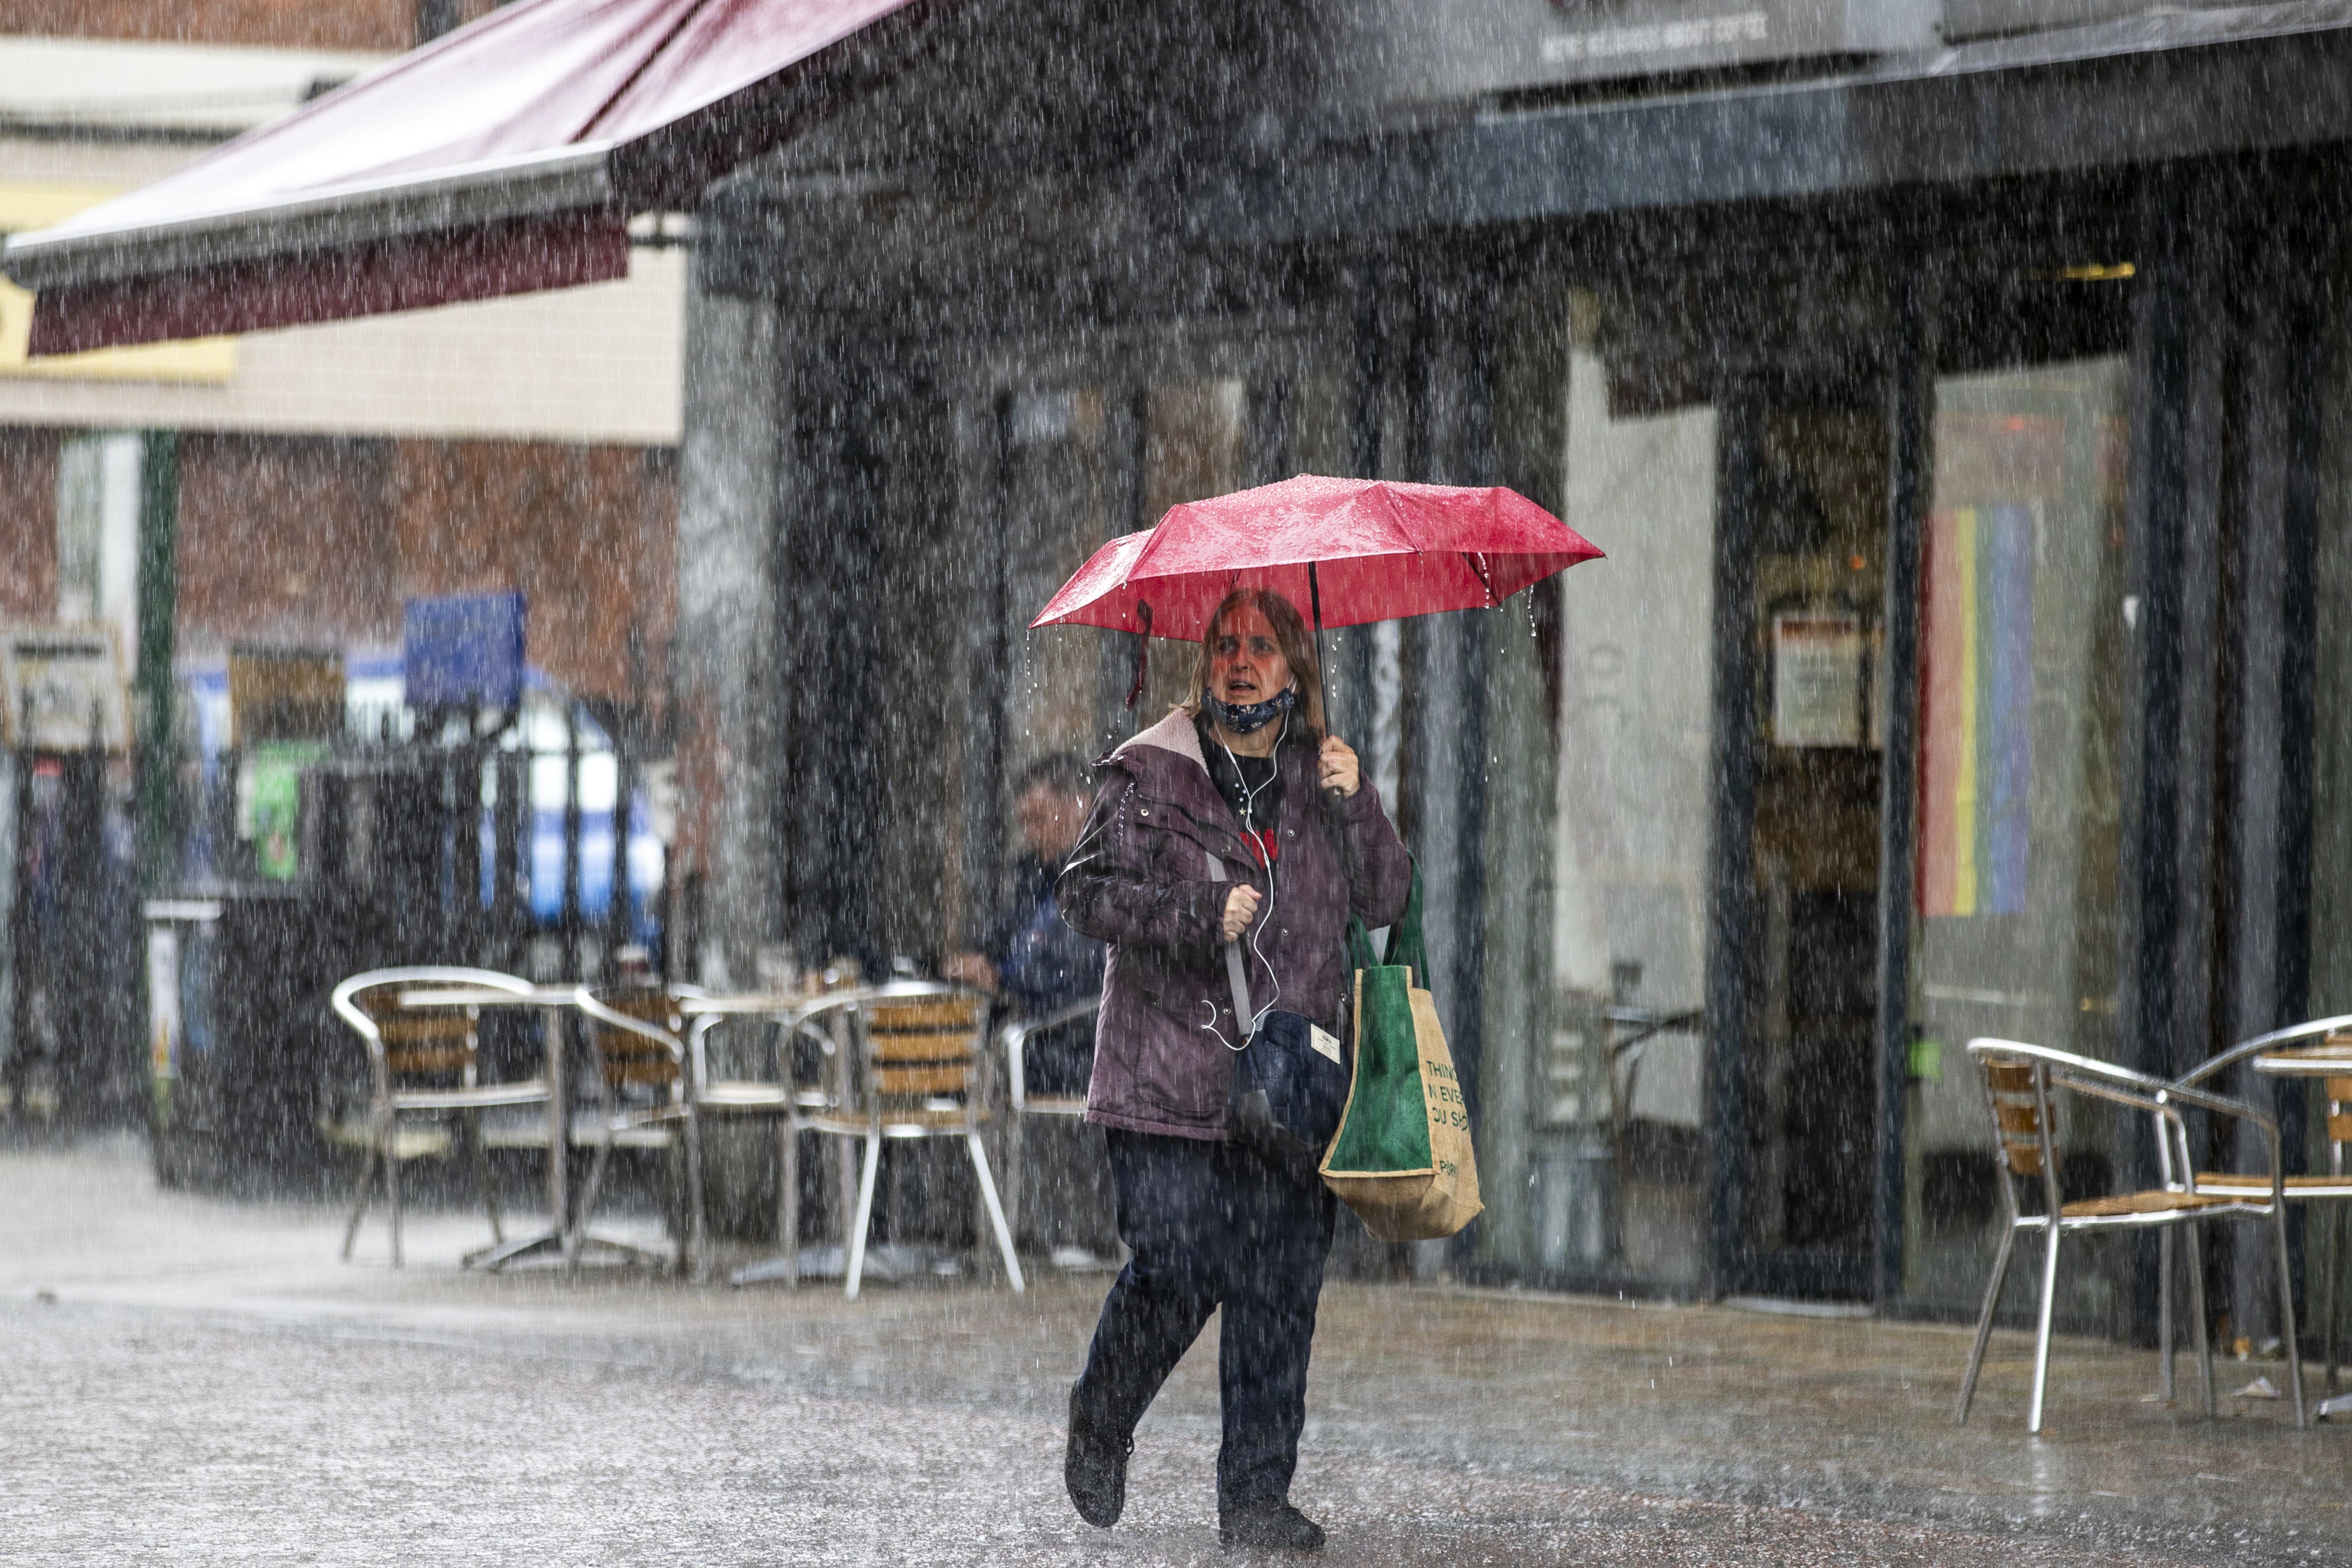 Five flood alerts have been issued in Wales